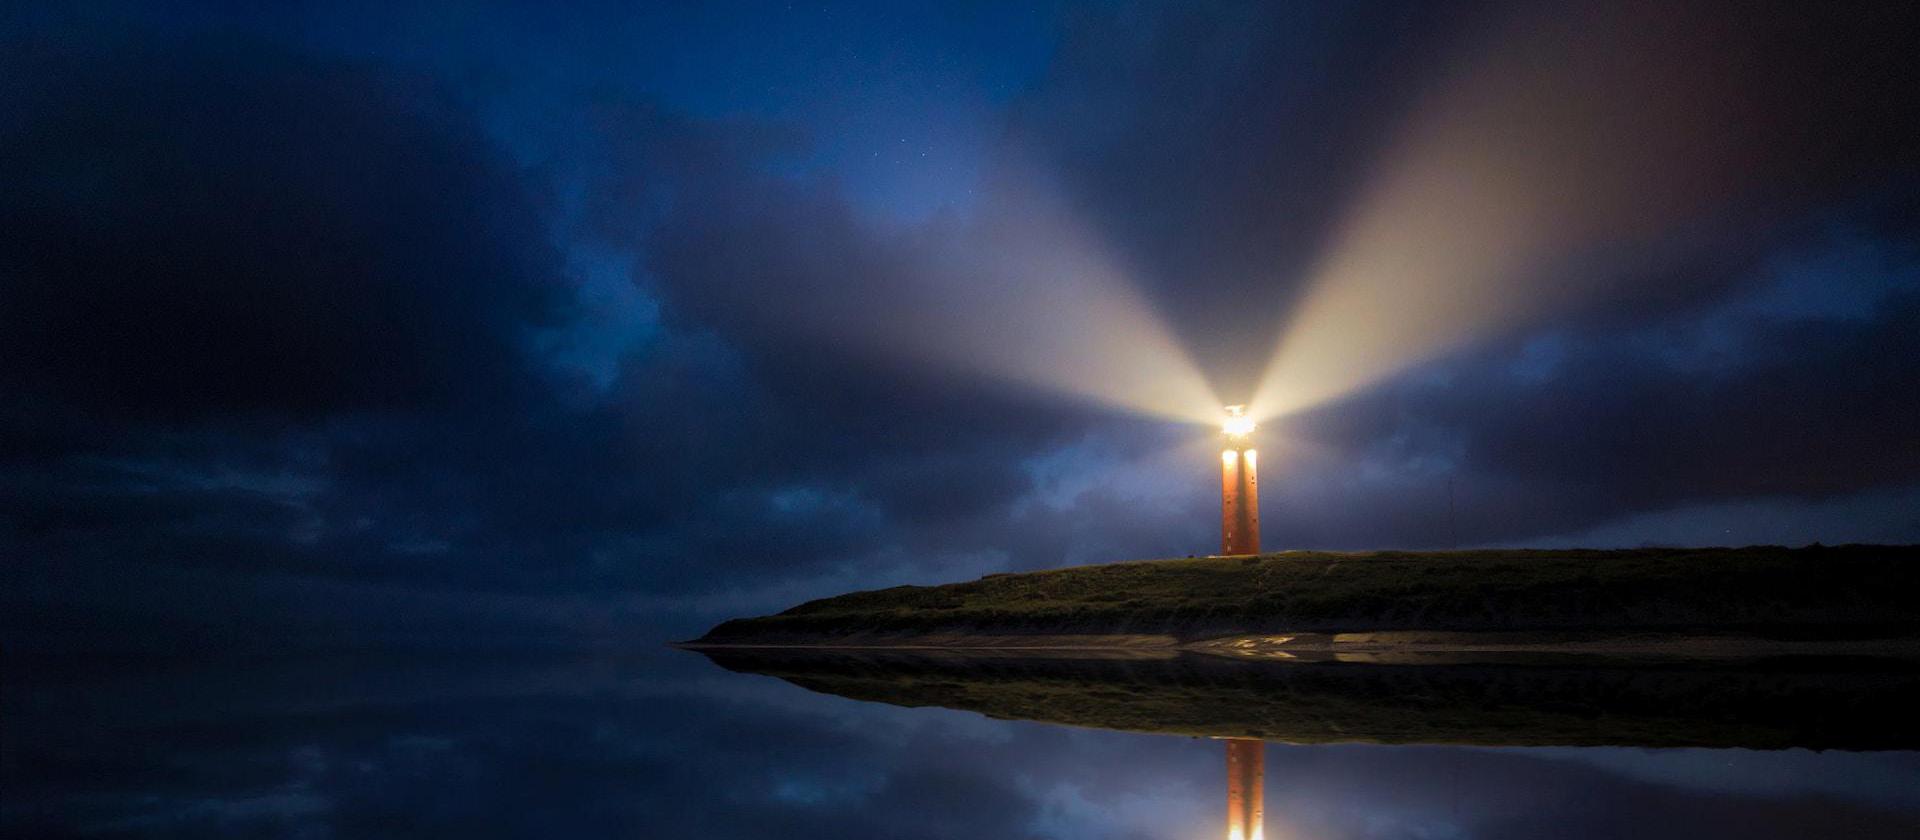 Image of lighted brown lighthouse beside body of water shining light out over the sea.